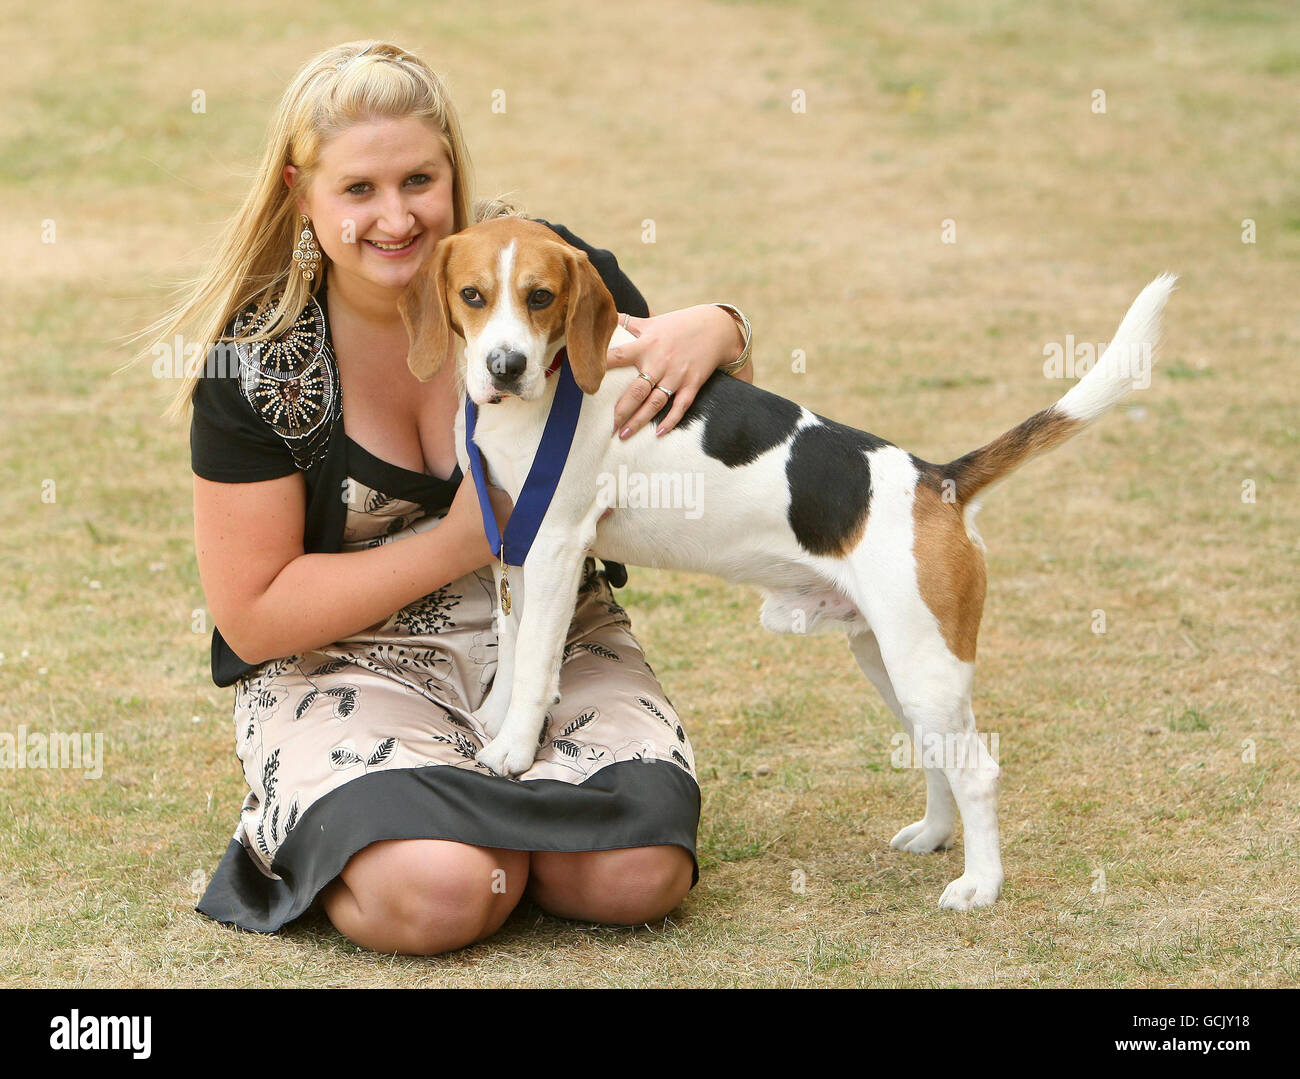 Jenny Barwise, from Cumbria, with her dog Frodo, after it was awarded the PDSA Gold Medal at an event held at the Tower of London. Stock Photo